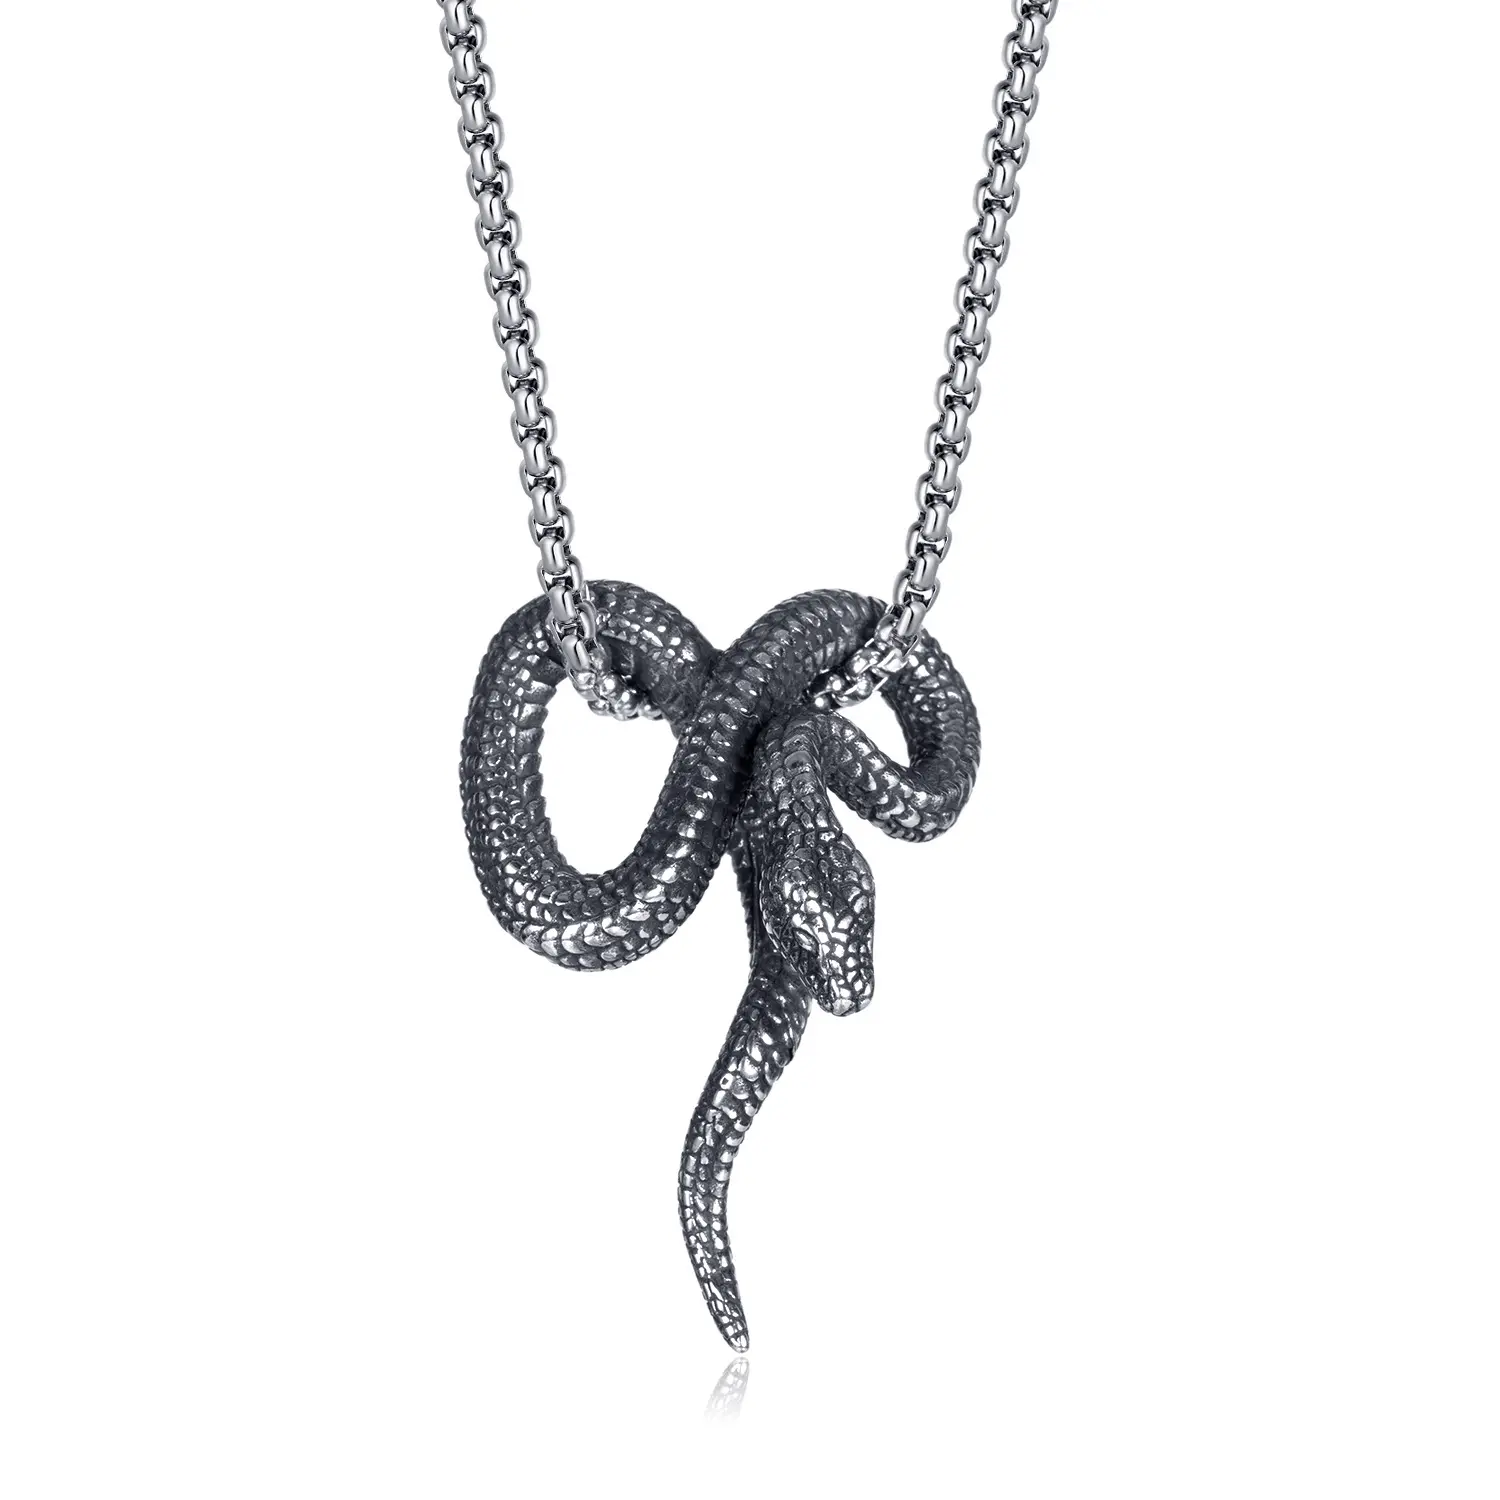 SSN128 Gothic Vintage Stainless Steel Snake Pendant Necklace Statement Cocktail Party Animal Pendant Chain Necklace for Men